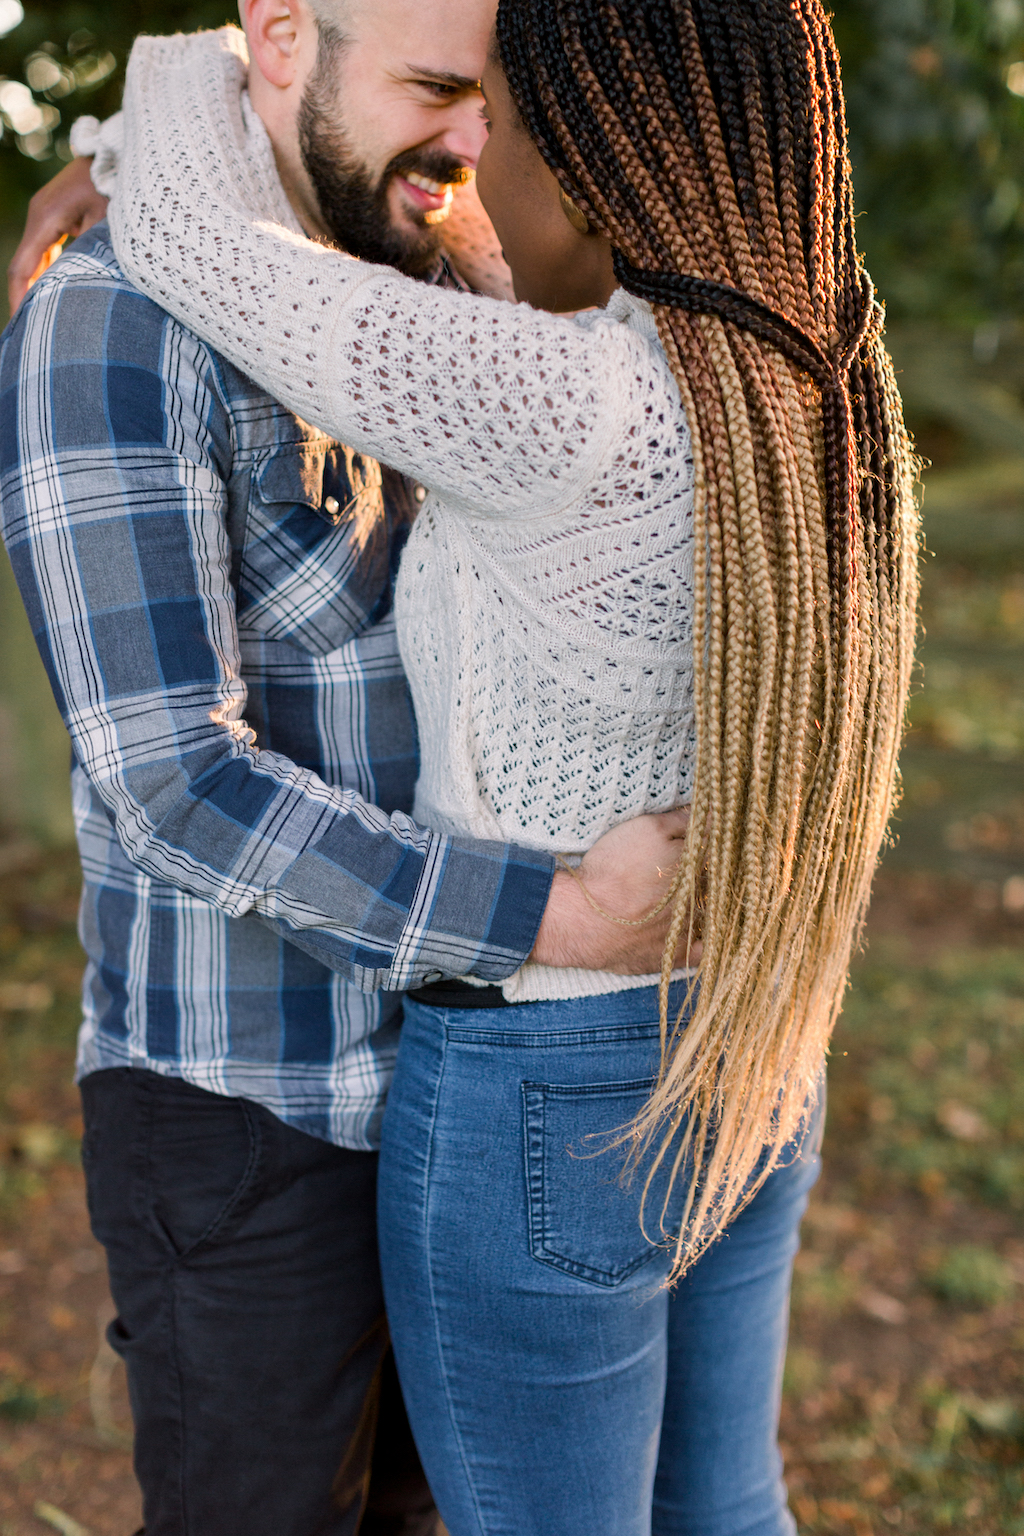 romantic outdoor photoshoot for engaged couples, Hannah K Photography